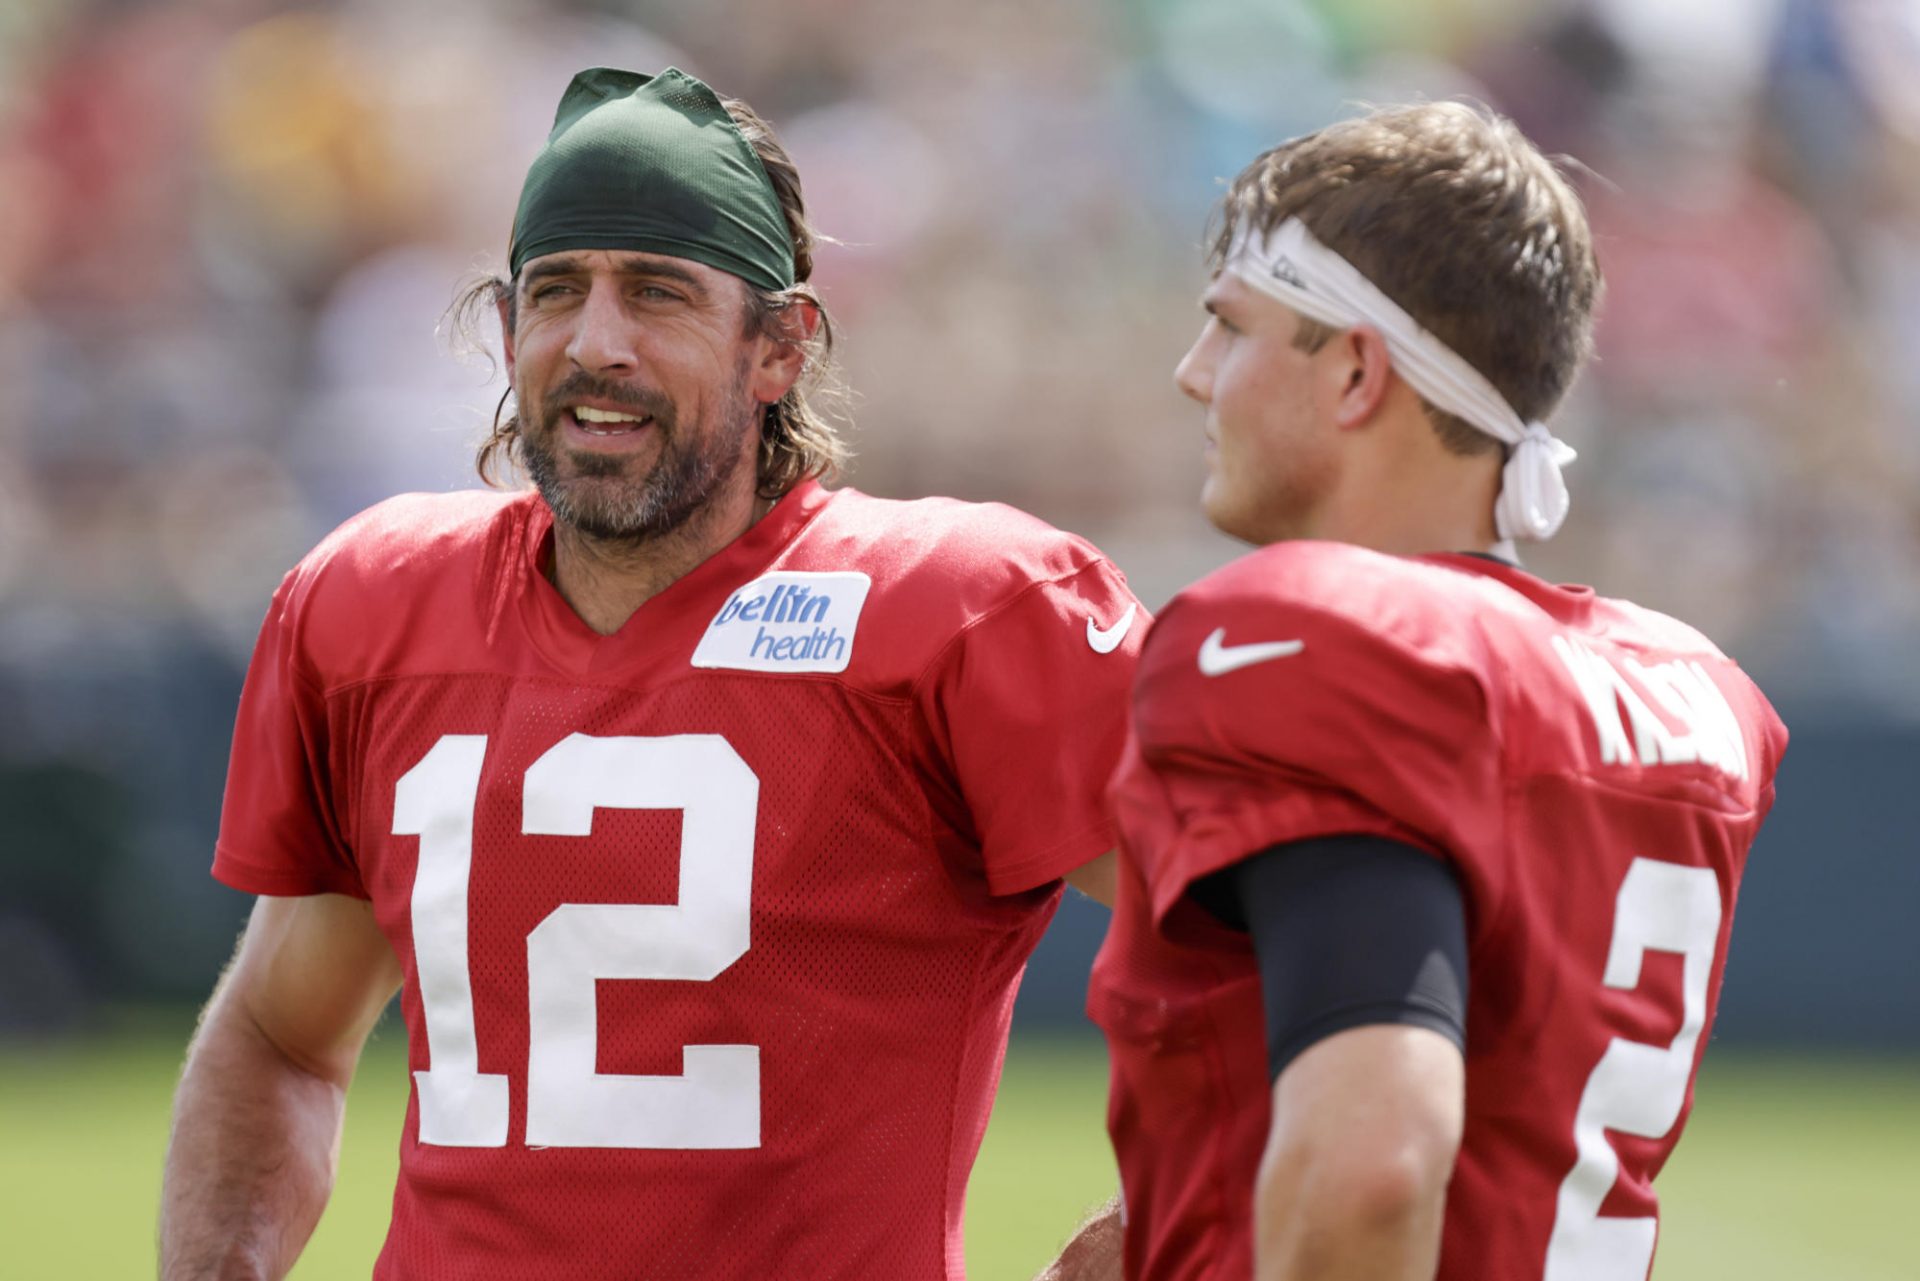 Jets’ Wilson enjoys ‘fanboy’ moment with Packers’ Rodgers